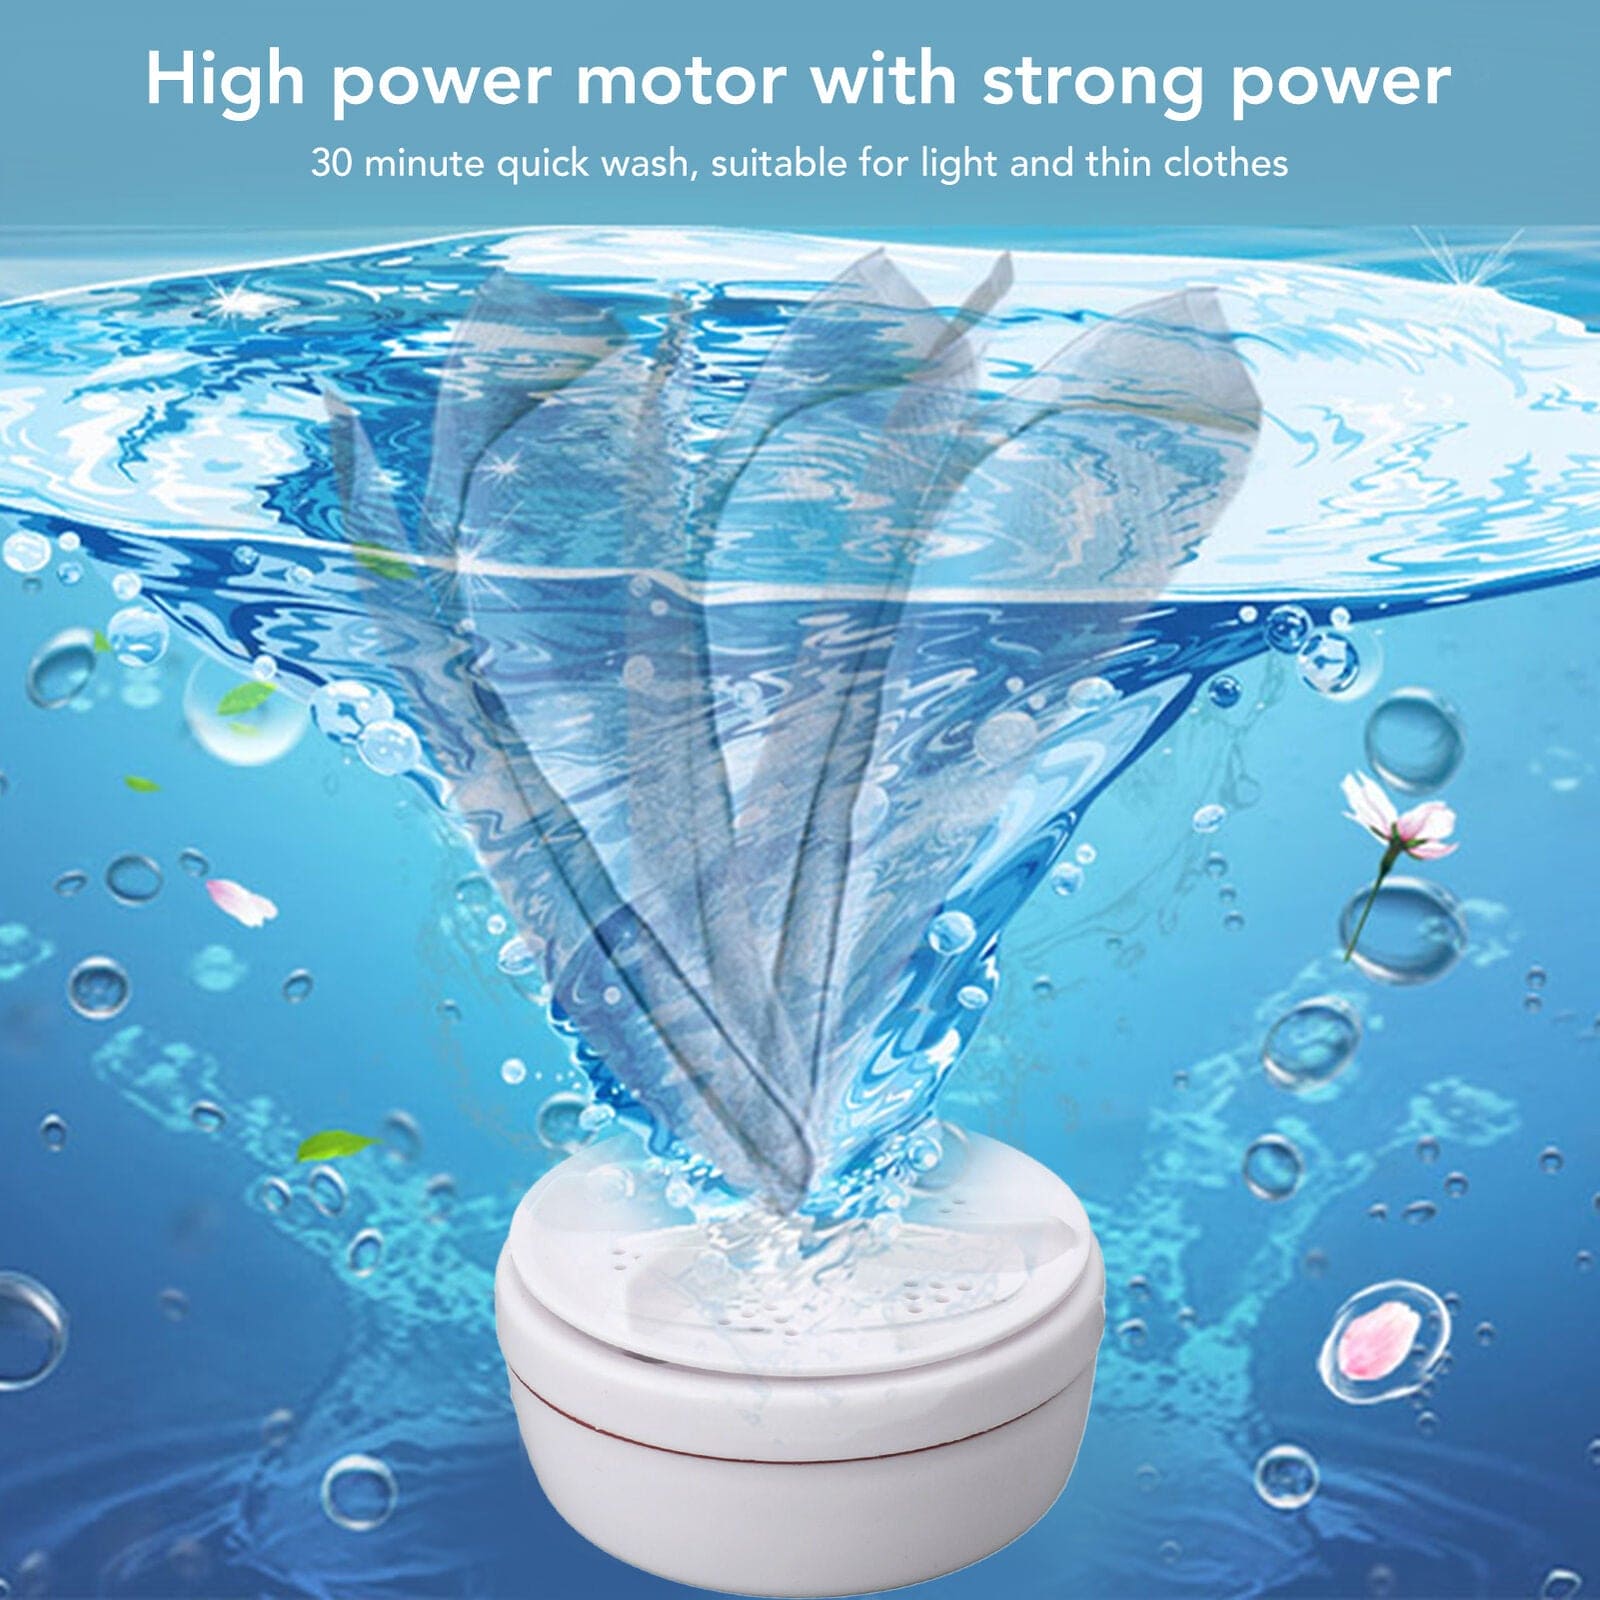 2 in 1 Ultrasonic Turbo Washing Machine, Portable Travel Washer, Air Bubble And Rotating Mini Ultrasonic Washing Machine,  Portable Removes Dirt Washer, USB Cable Machine for Travel